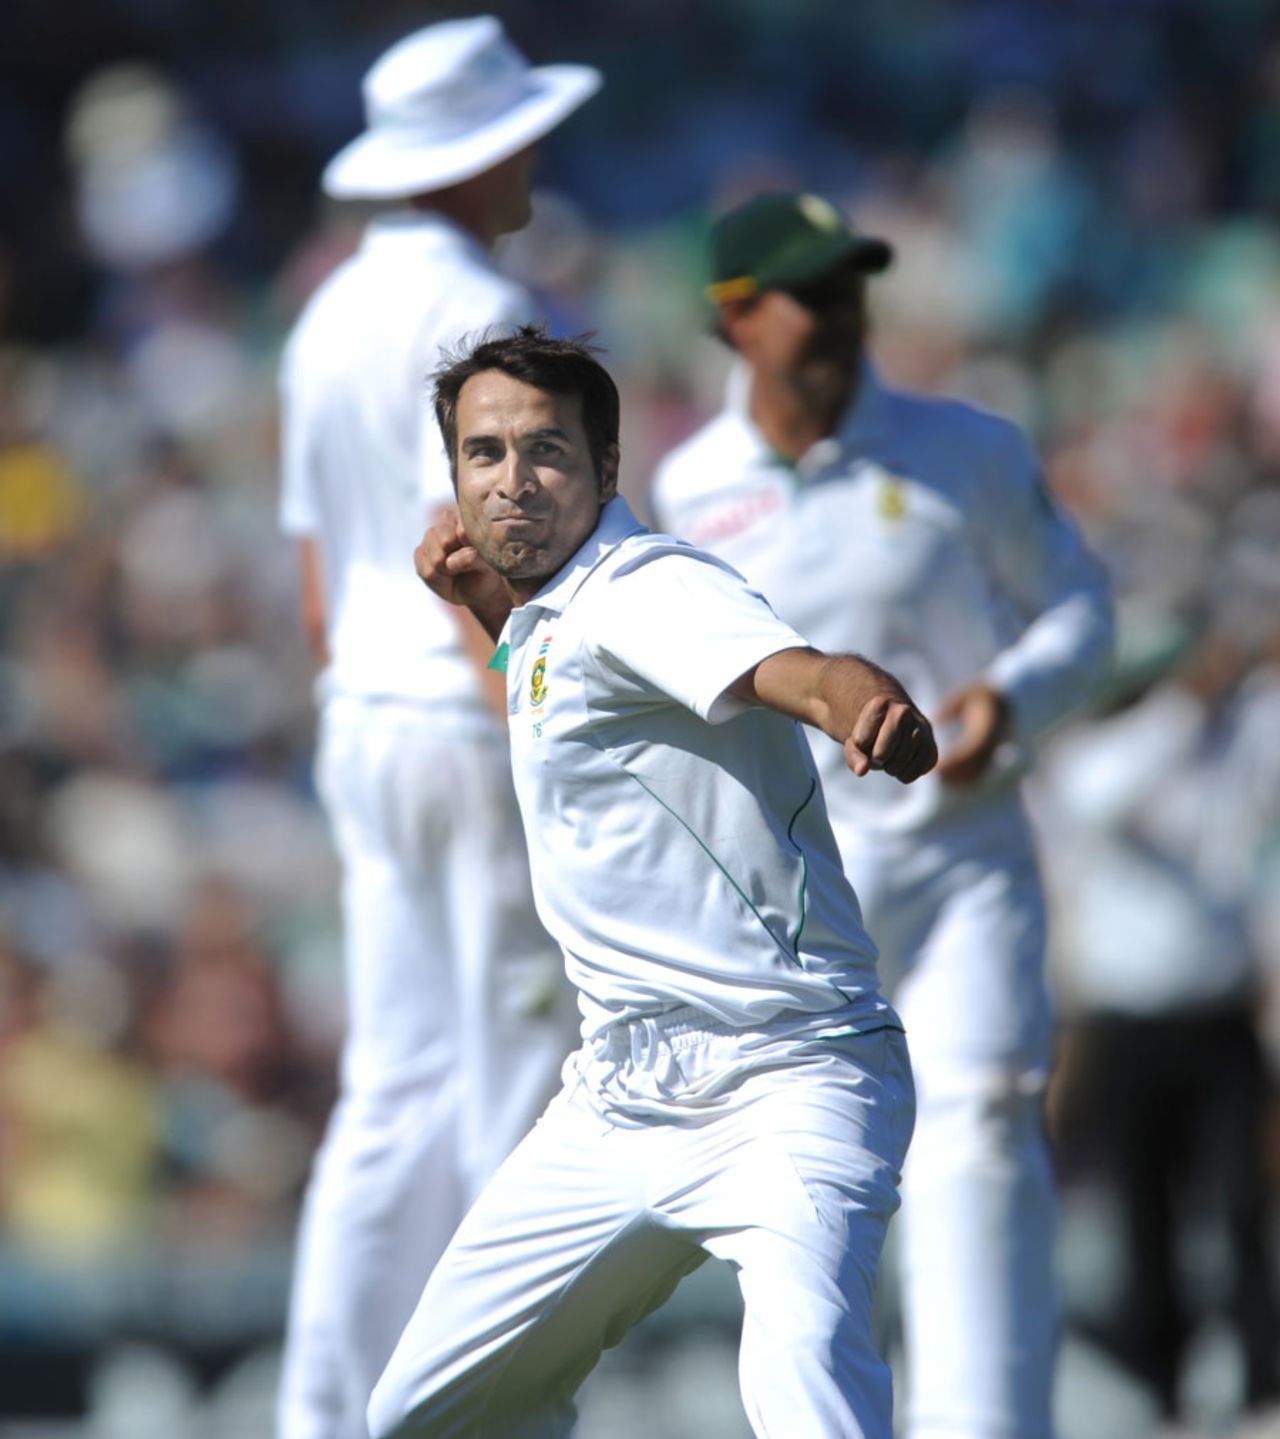 Imran Tahir played a key part on the final day, England v South Africa, 1st Investec Test, The Oval, 5th day, July 23, 2012